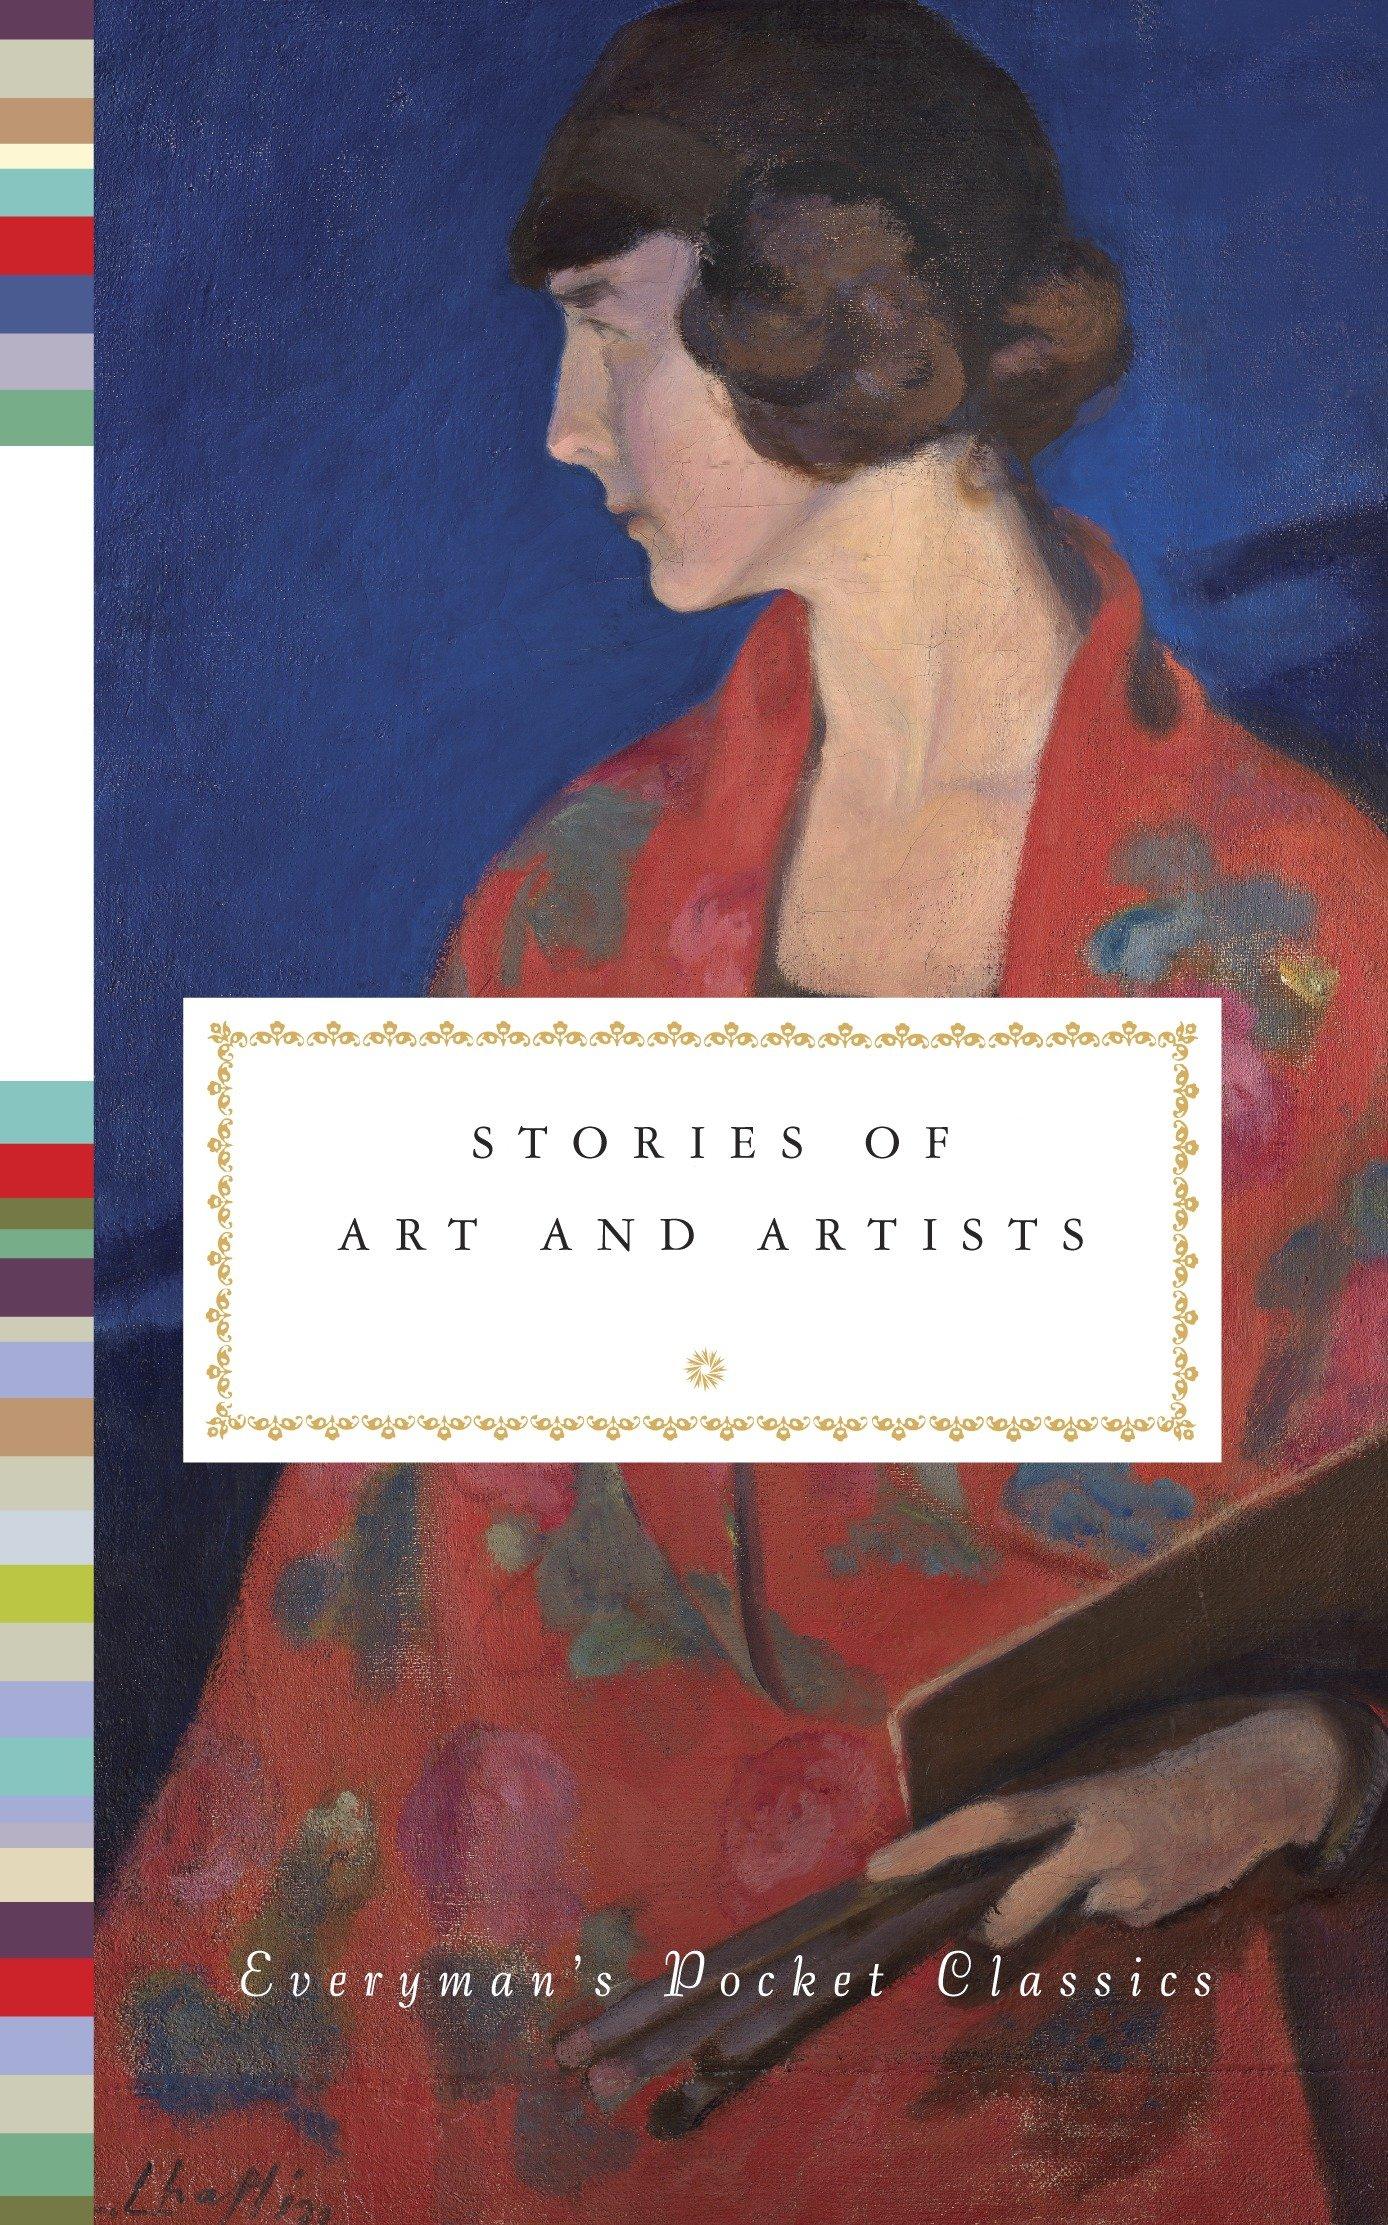 Stories of Art and Artists / Diana Secker Tesdell / Buch / Everyman / Englisch / 2014 / Knopf Doubleday Publishing Group / EAN 9780375712494 - Tesdell, Diana Secker